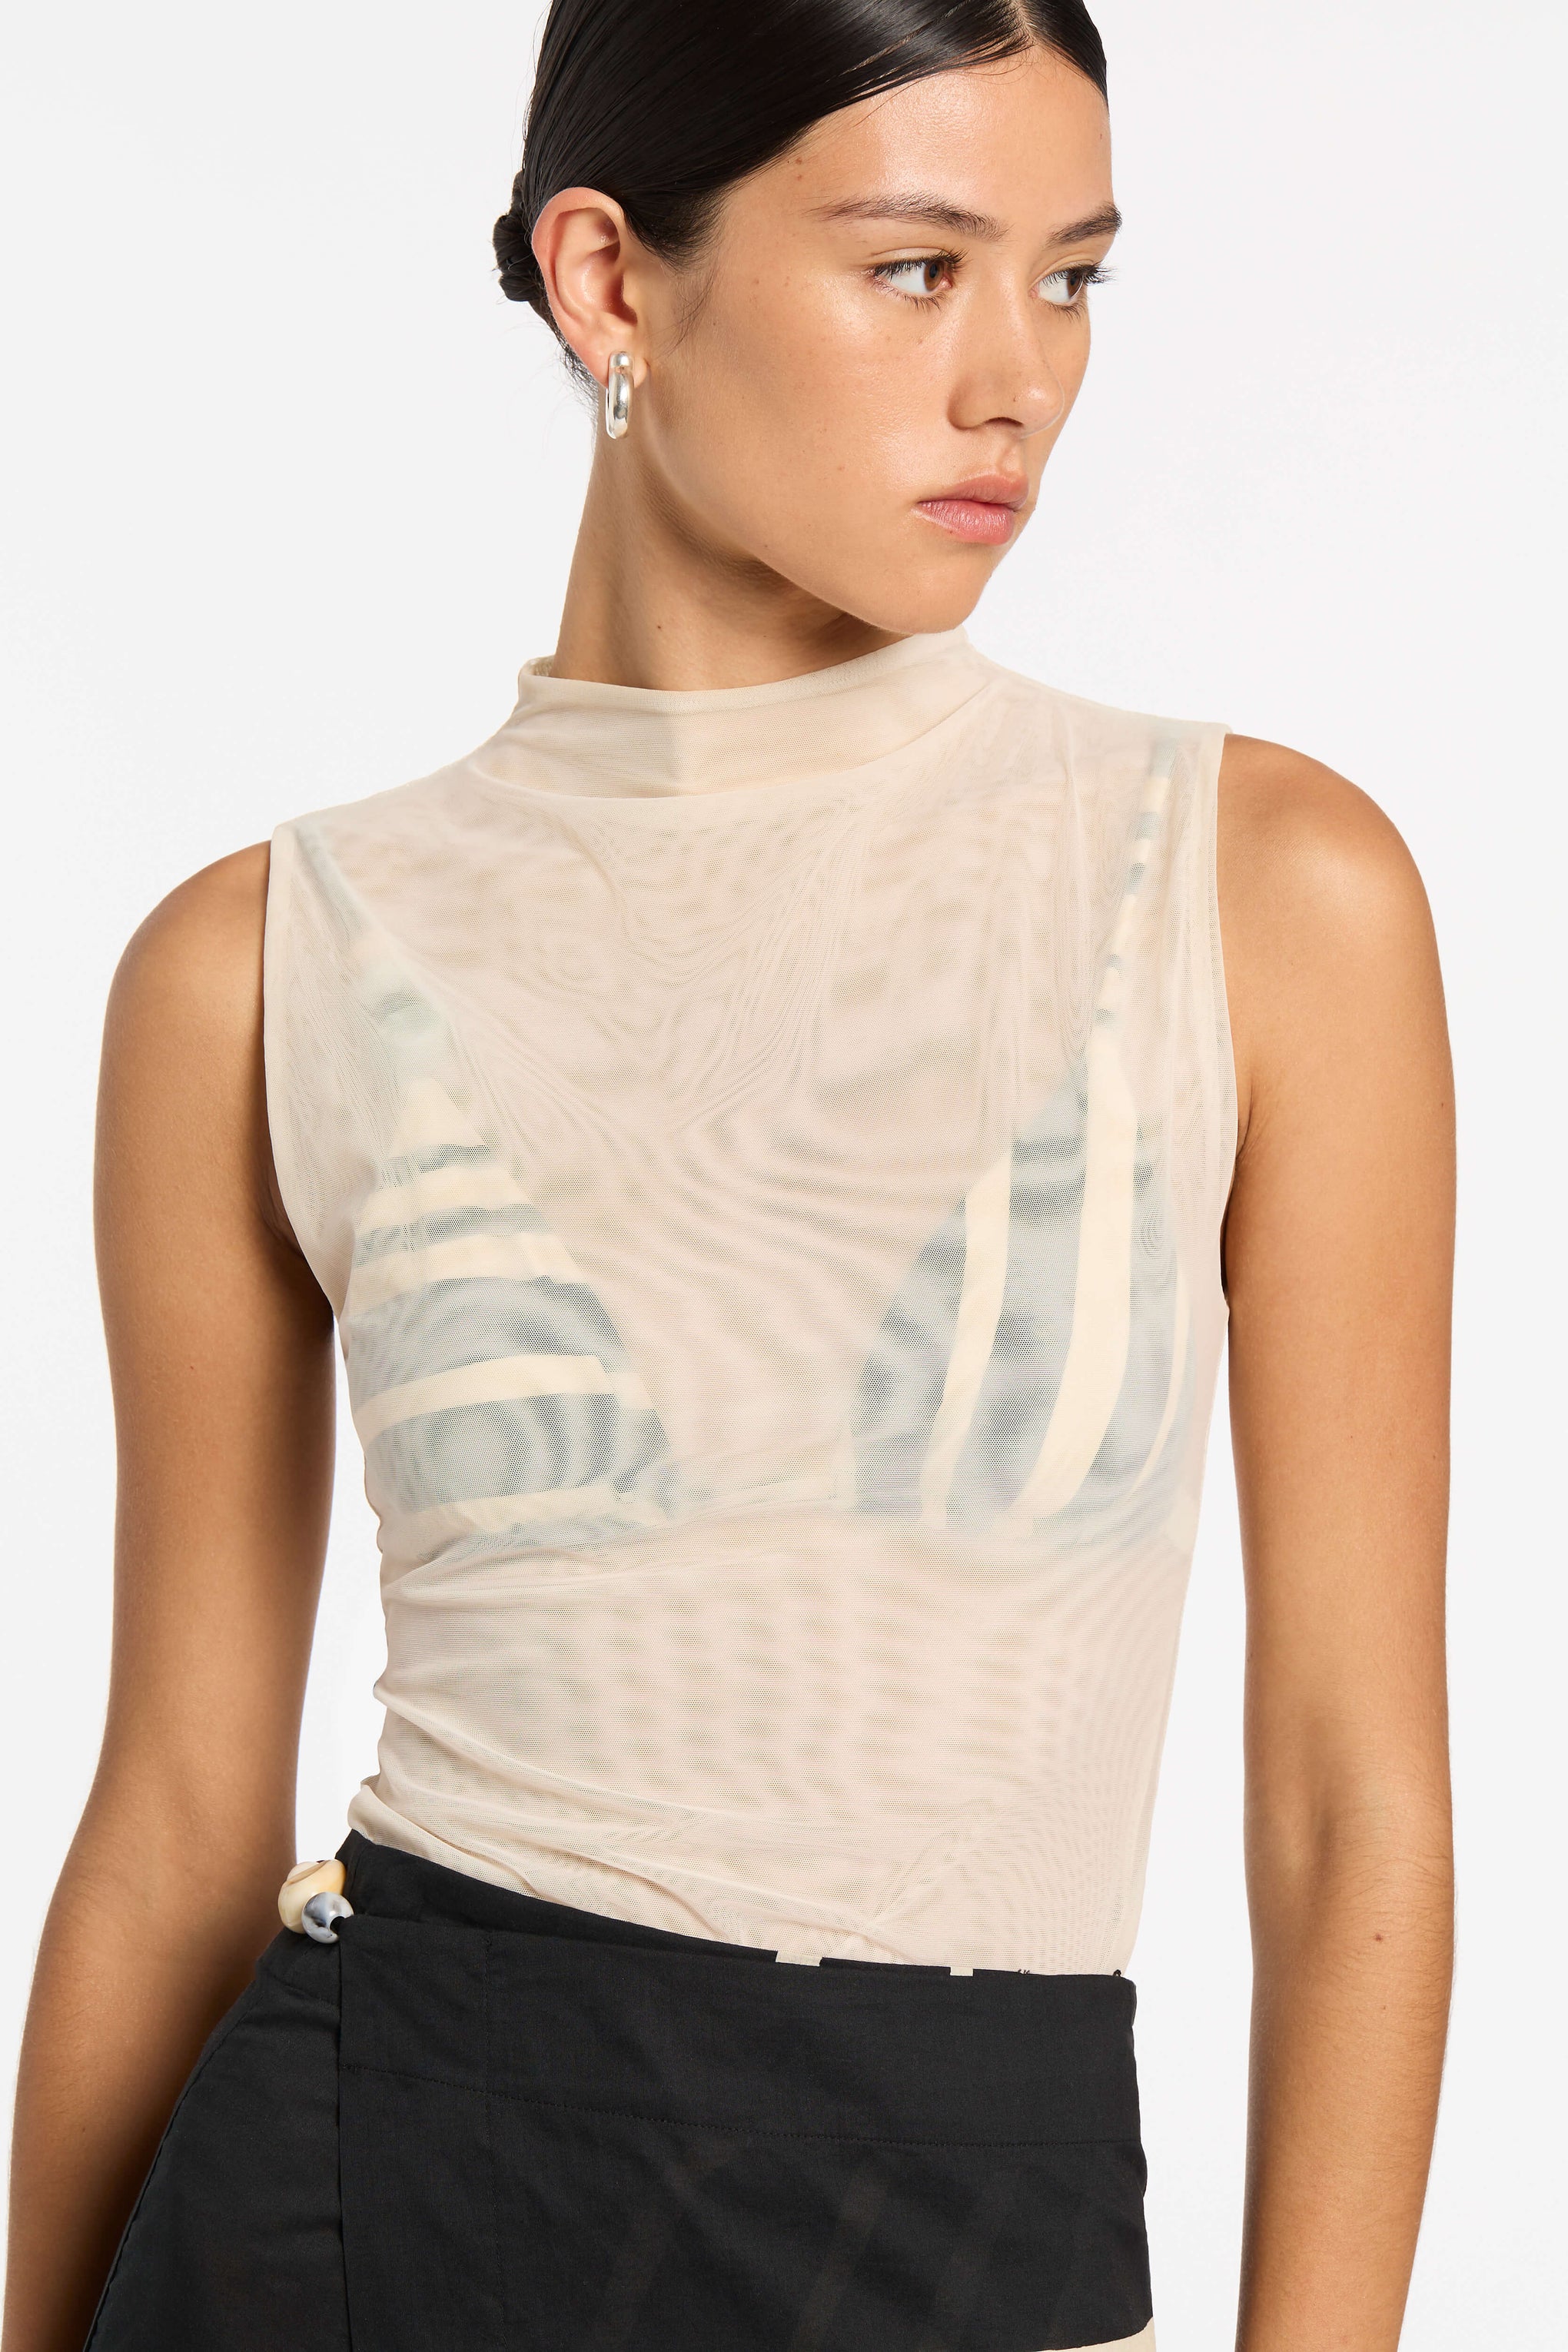 SIR Jacques Mesh Tank in Ecru available at TNT The New Trend Australia.